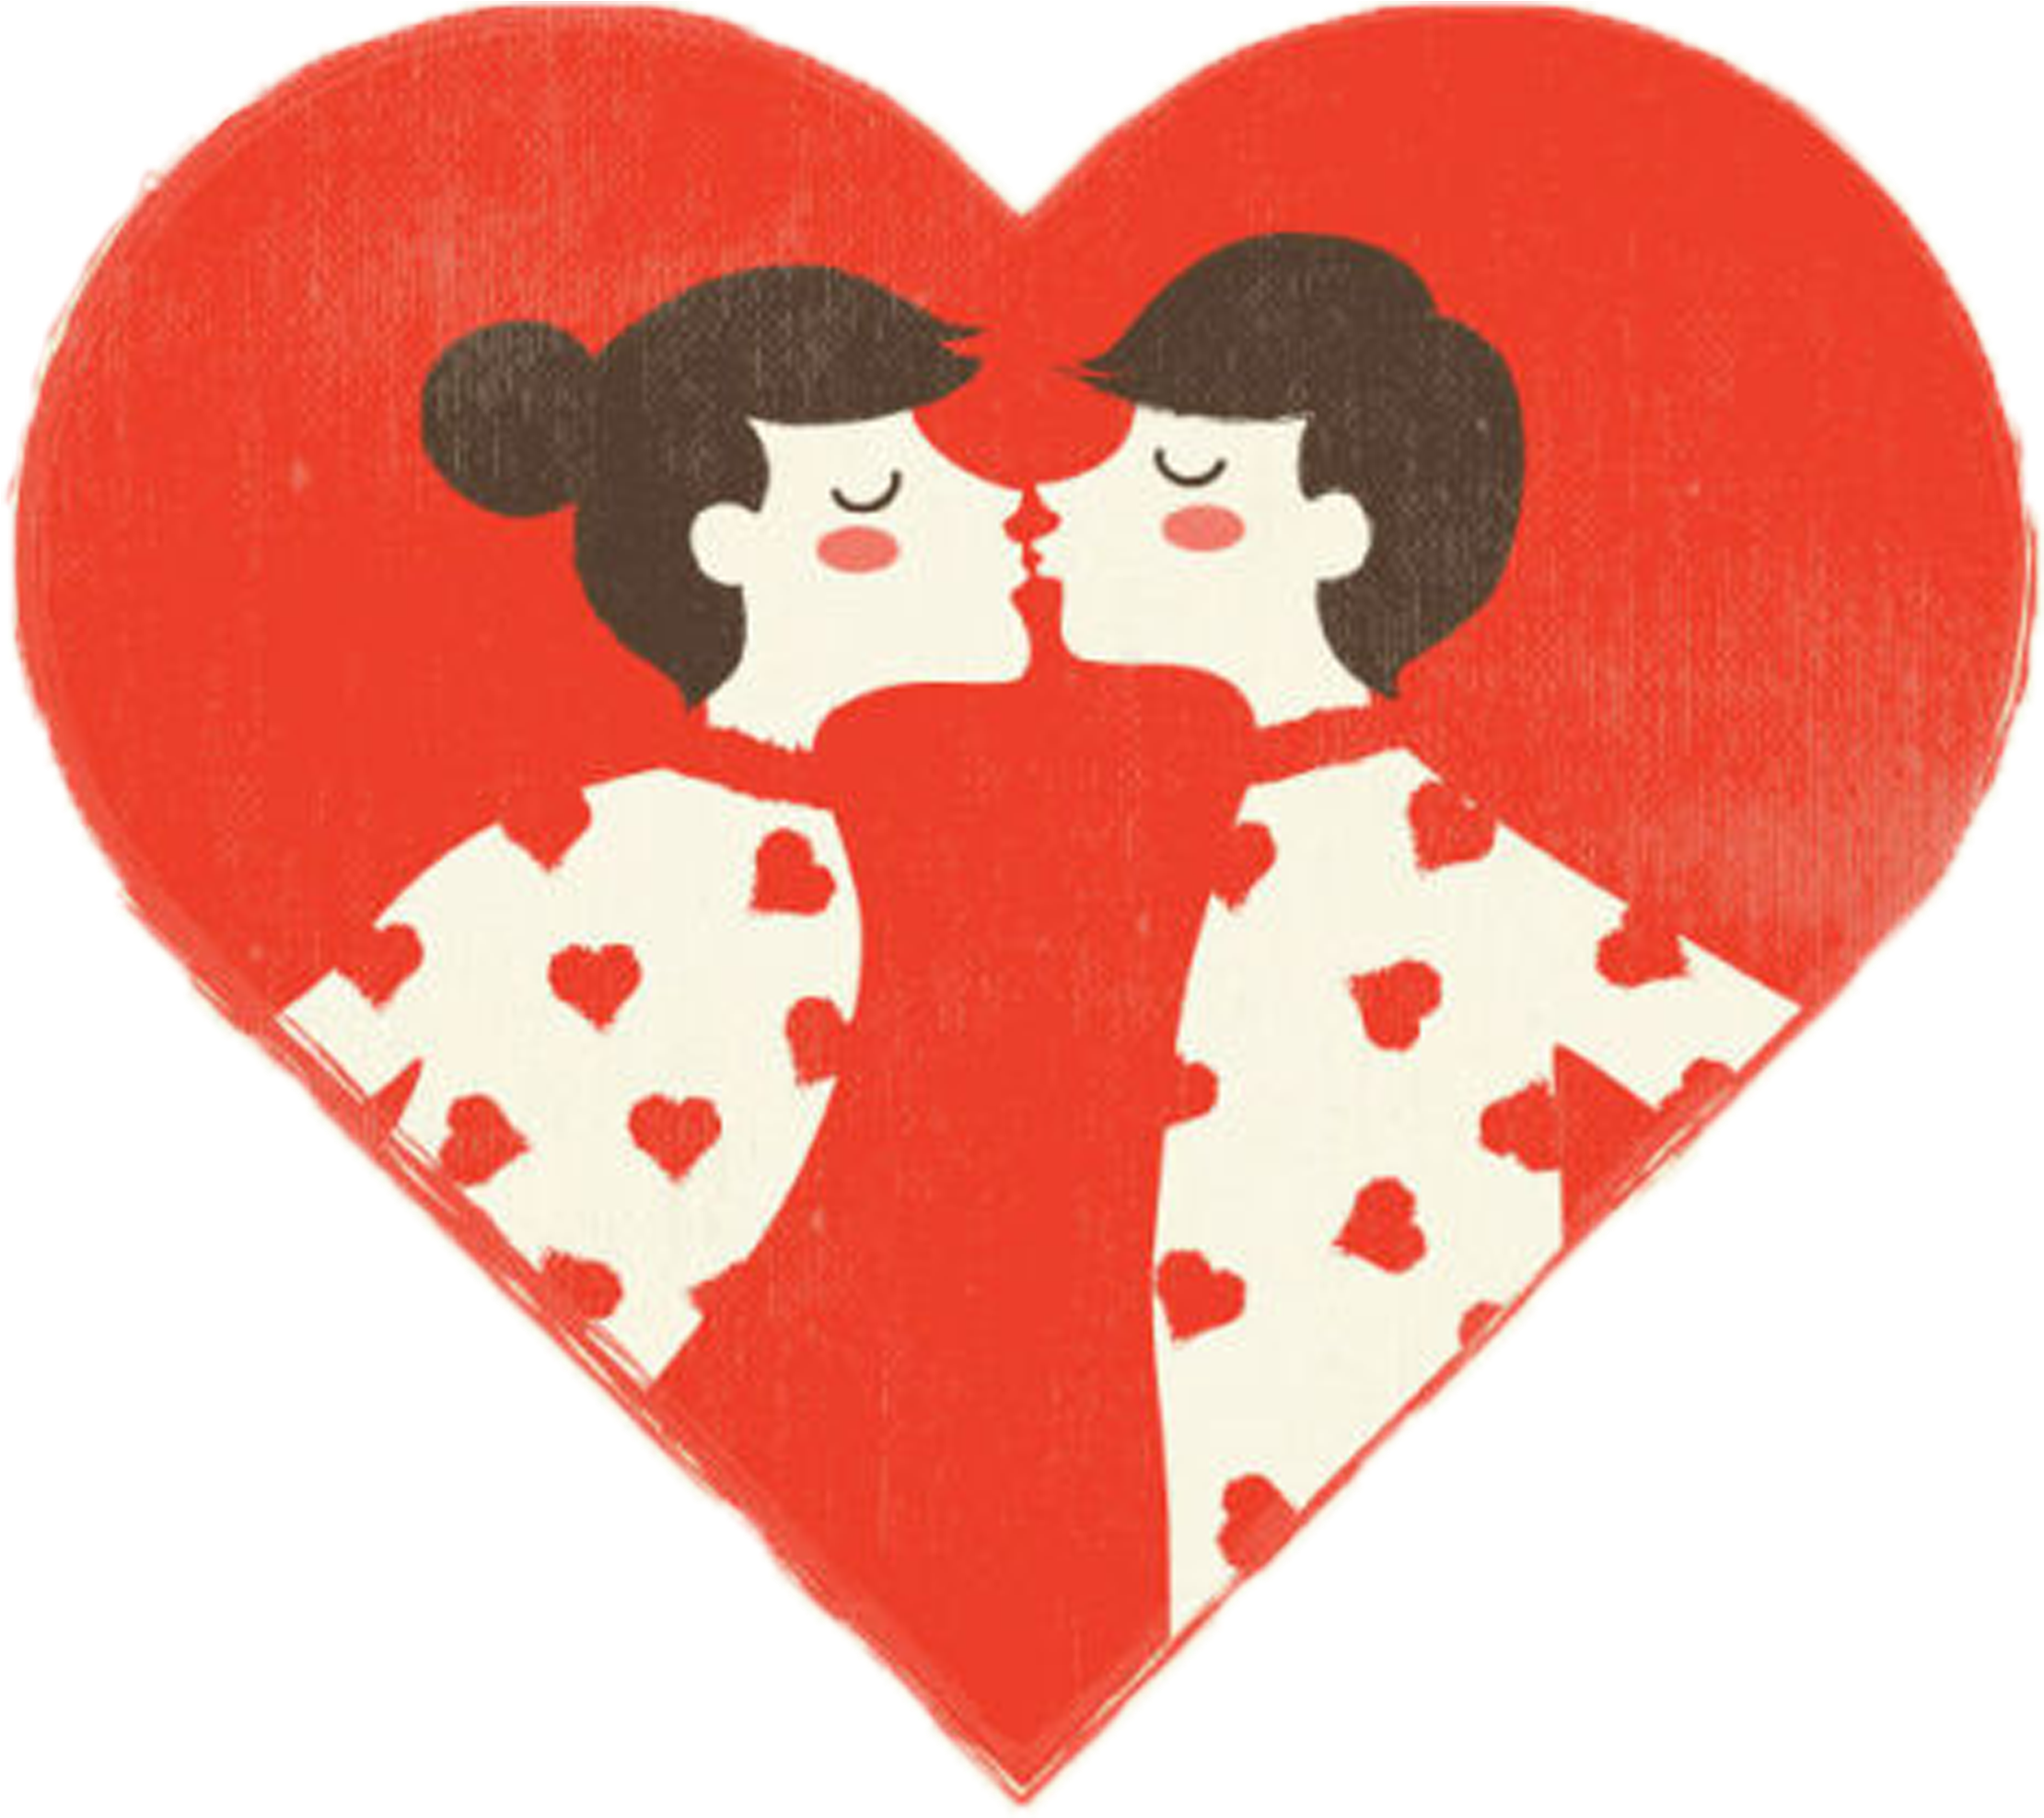 International Kissing Day Happiness Valentines Day - Happy Anniversary Fun Wishes Friends (2480x3508)